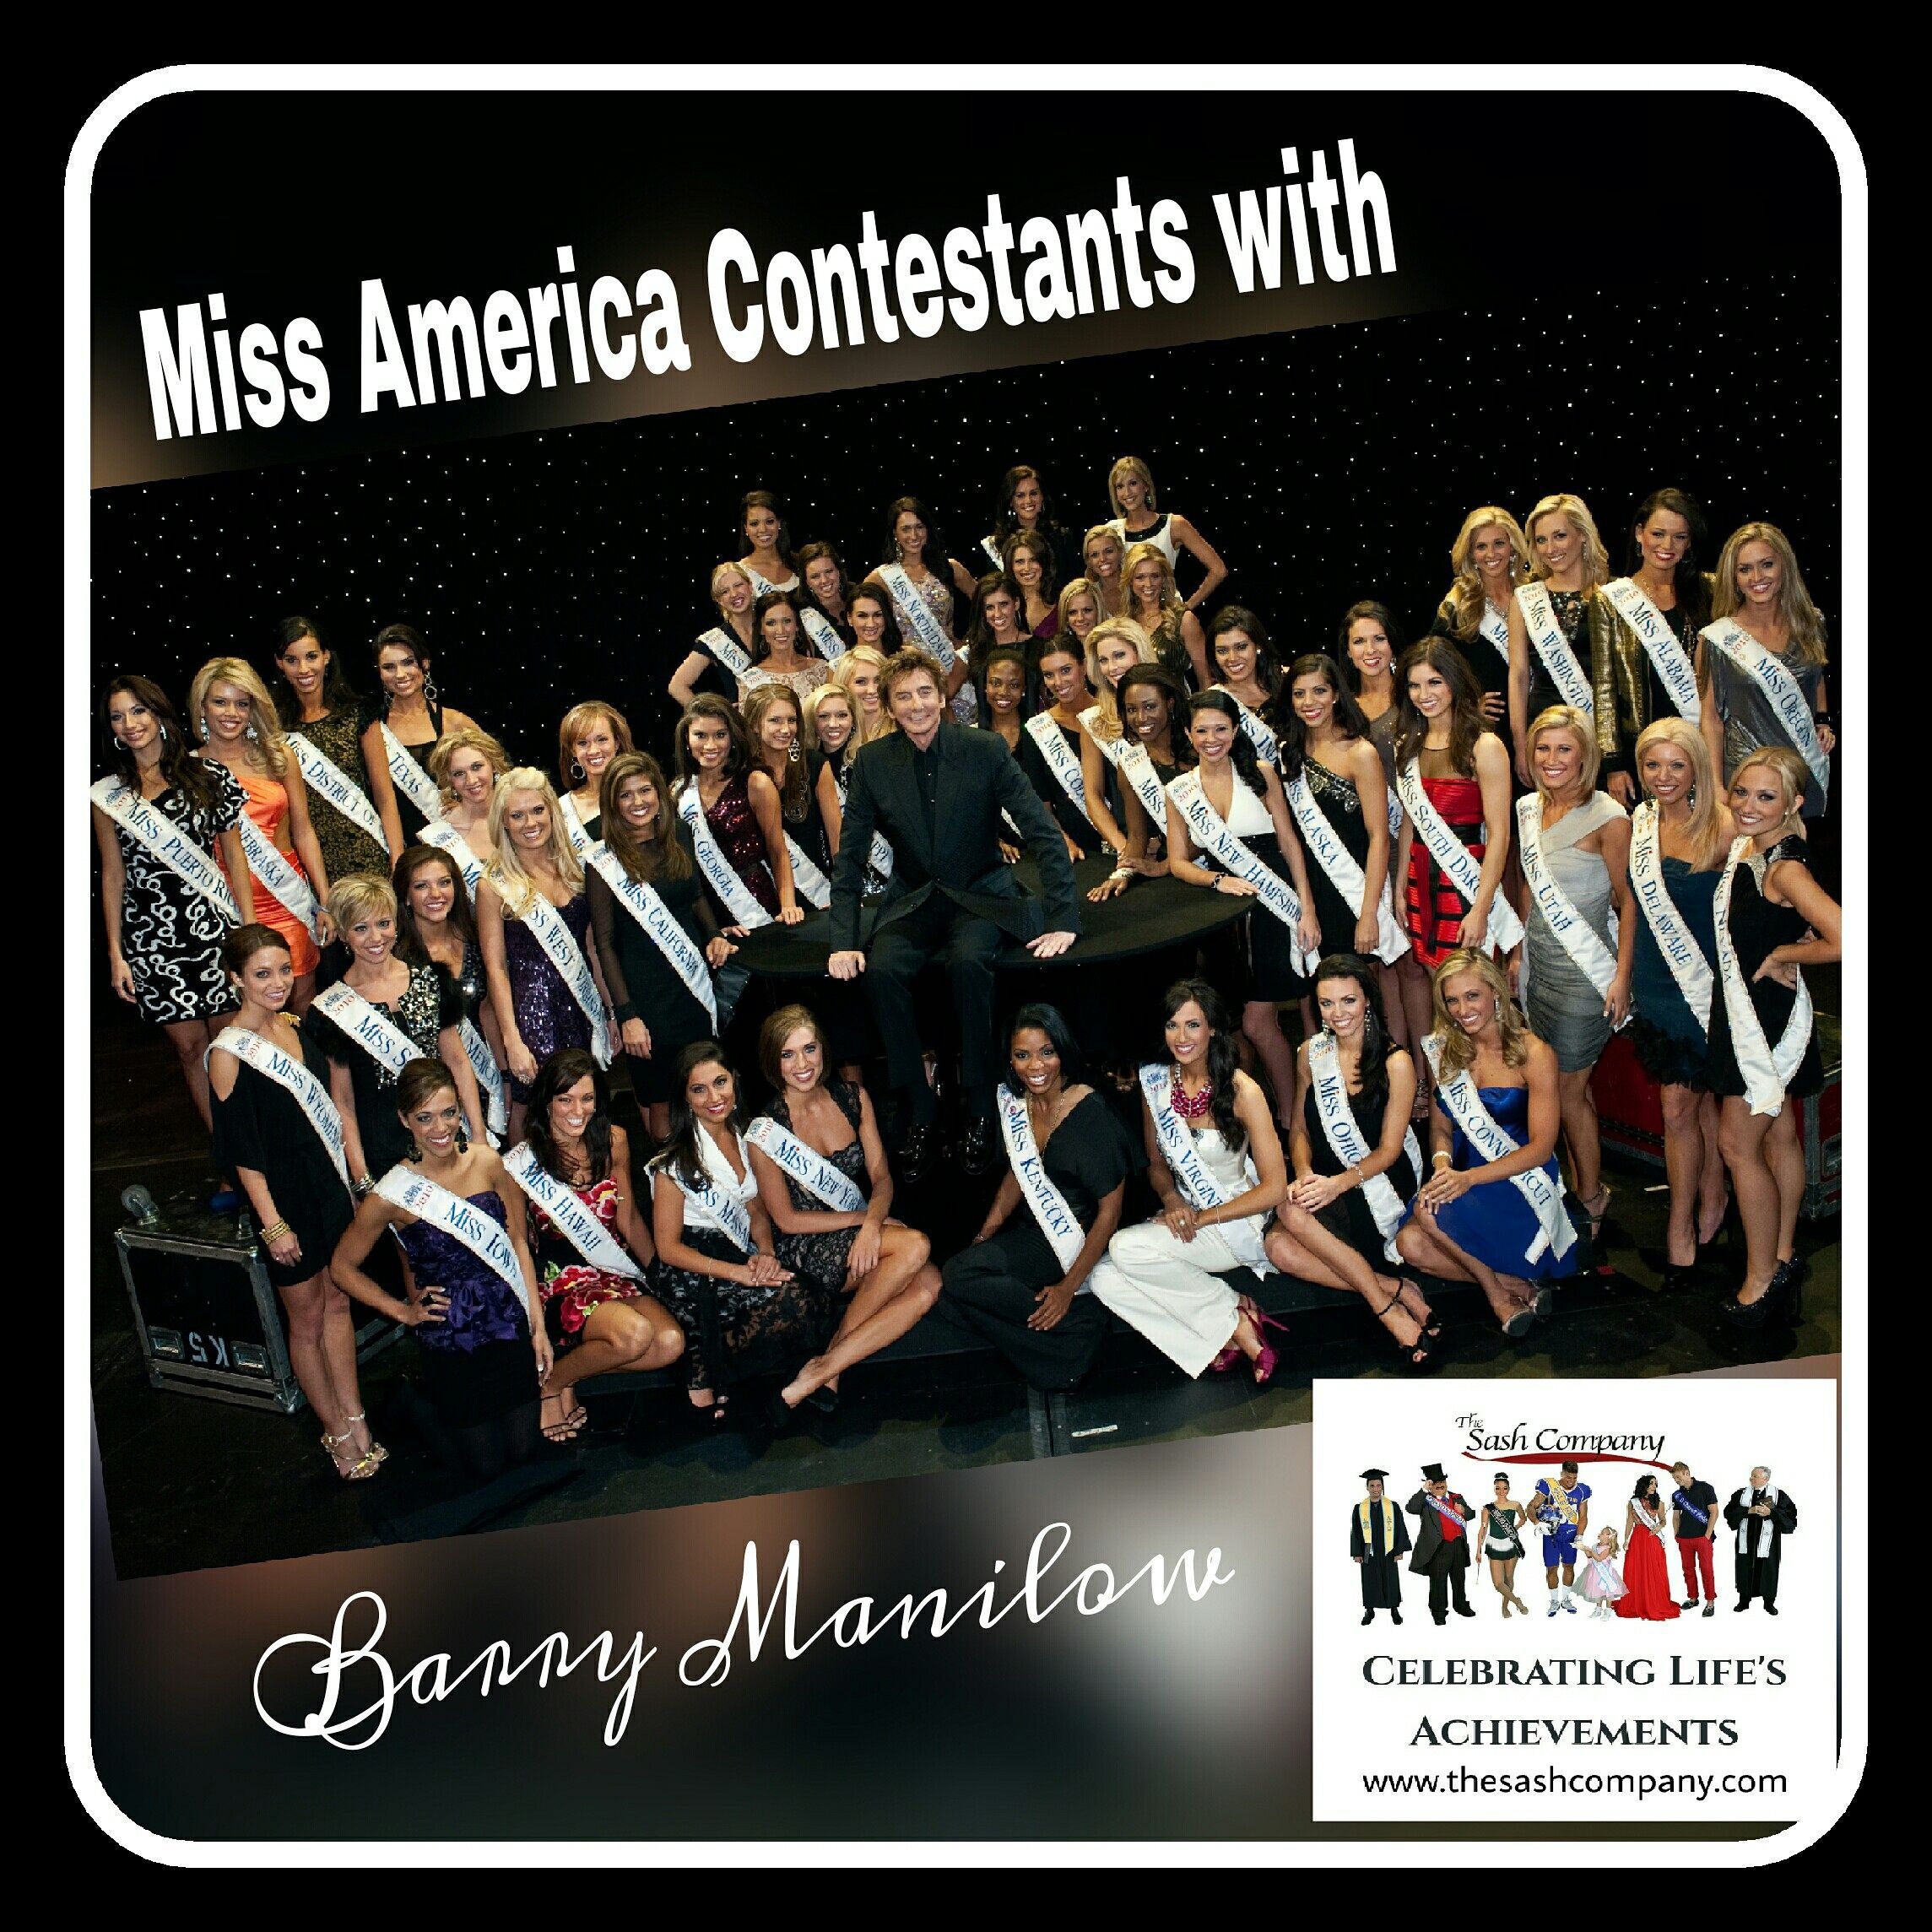 Miss America Contestants with Barry Manilow